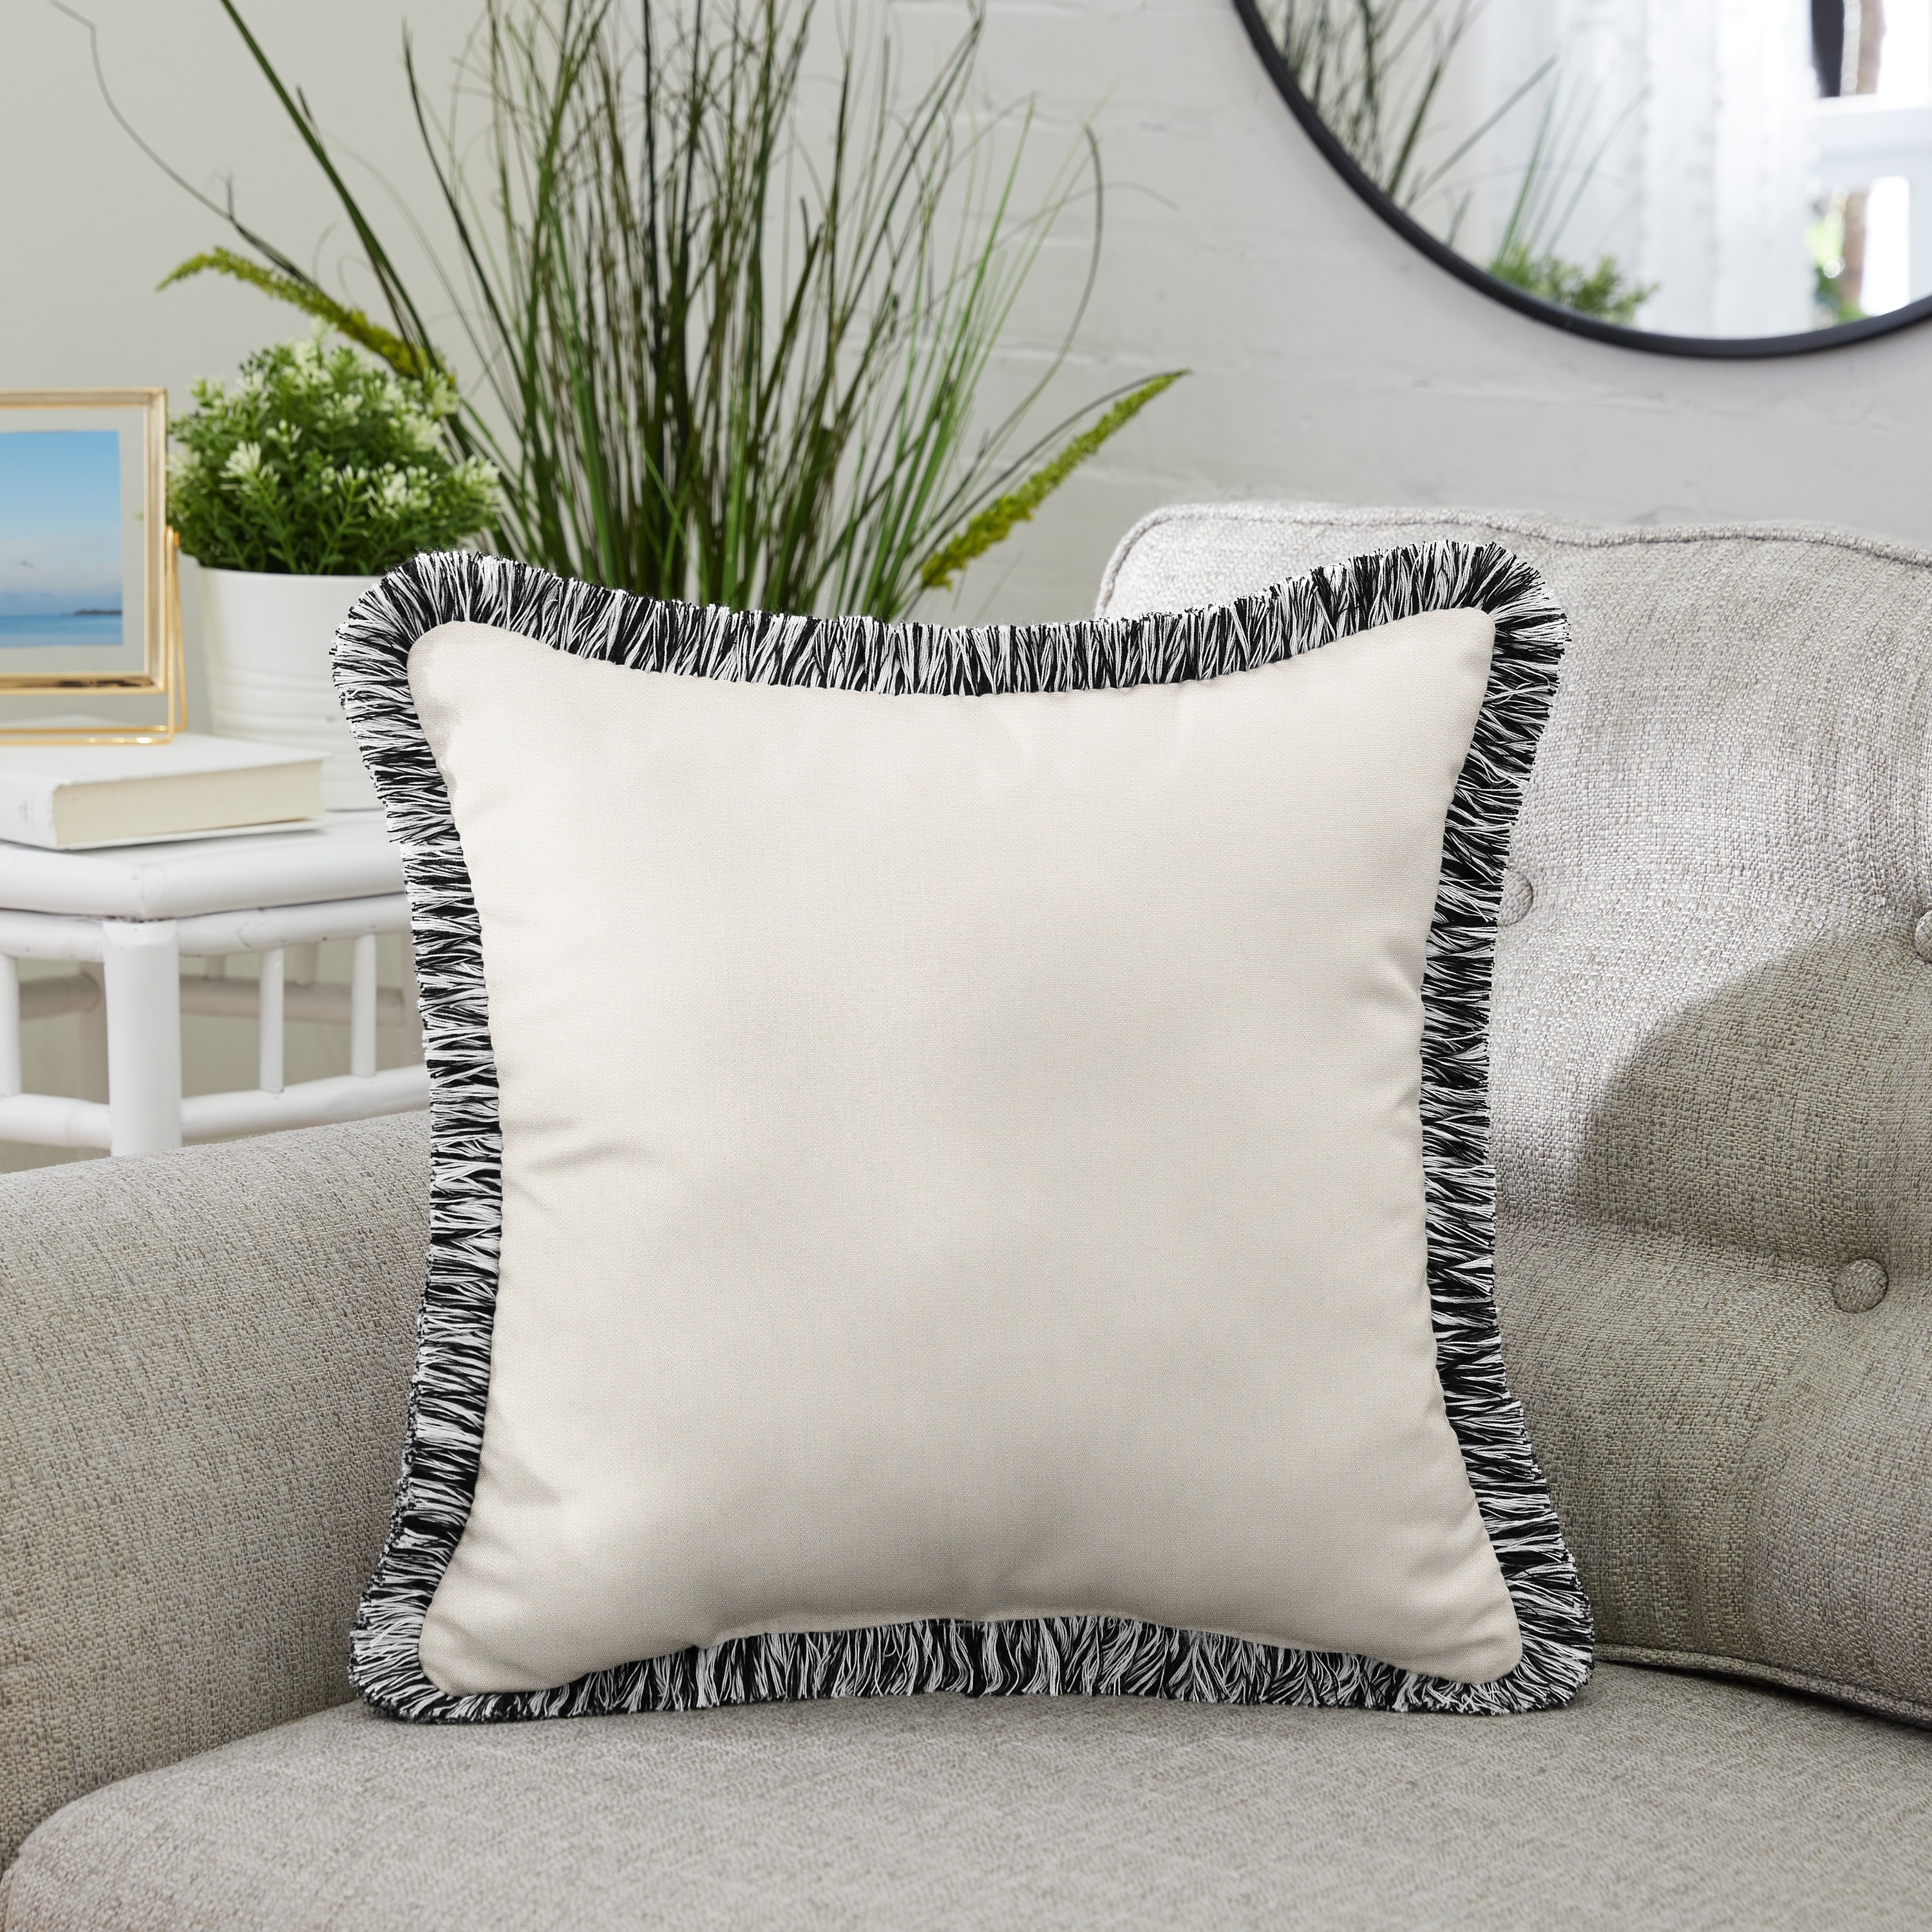 https://ak1.ostkcdn.com/images/products/is/images/direct/eb89f818b51aaeaa655344a5a1b7eb659d783100/Sunbrella-Canvas-Natural-Indoor--Outdoor-Square-Pillow-with-Fringe.jpg